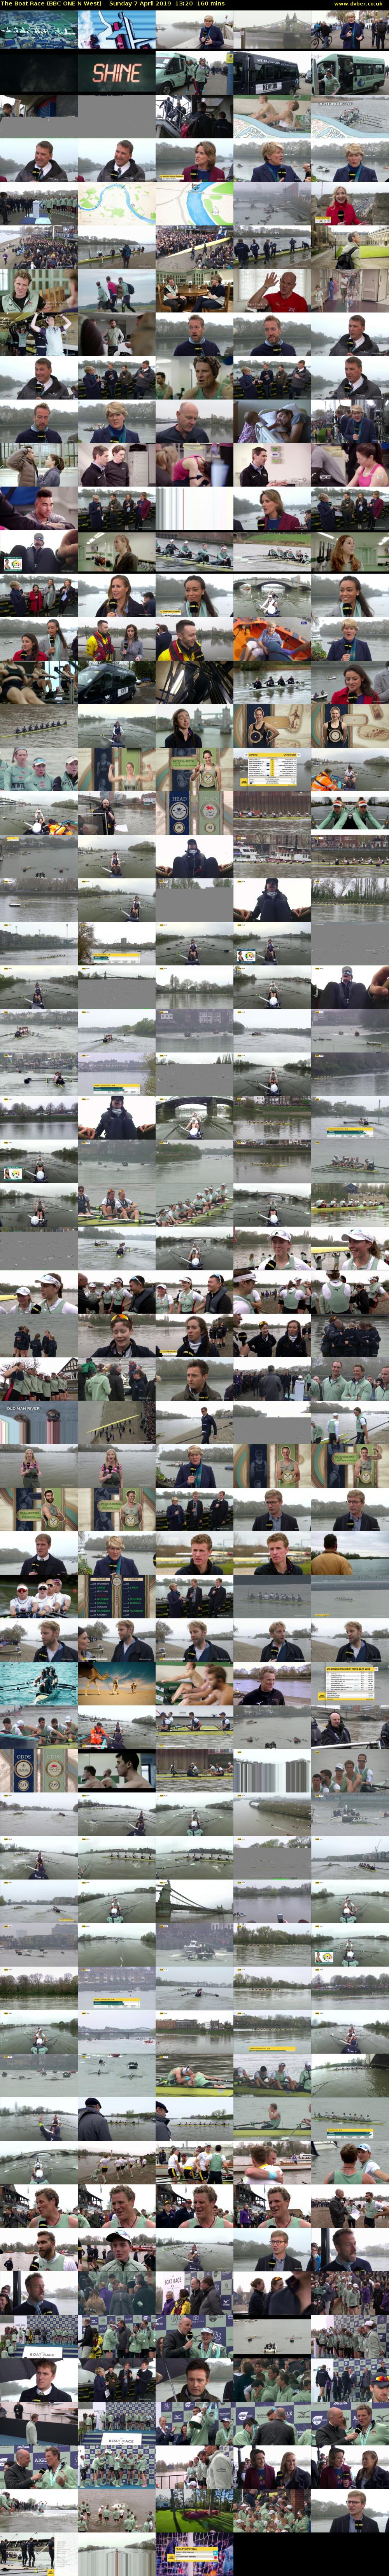 The Boat Race (BBC ONE N West) Sunday 7 April 2019 13:20 - 16:00